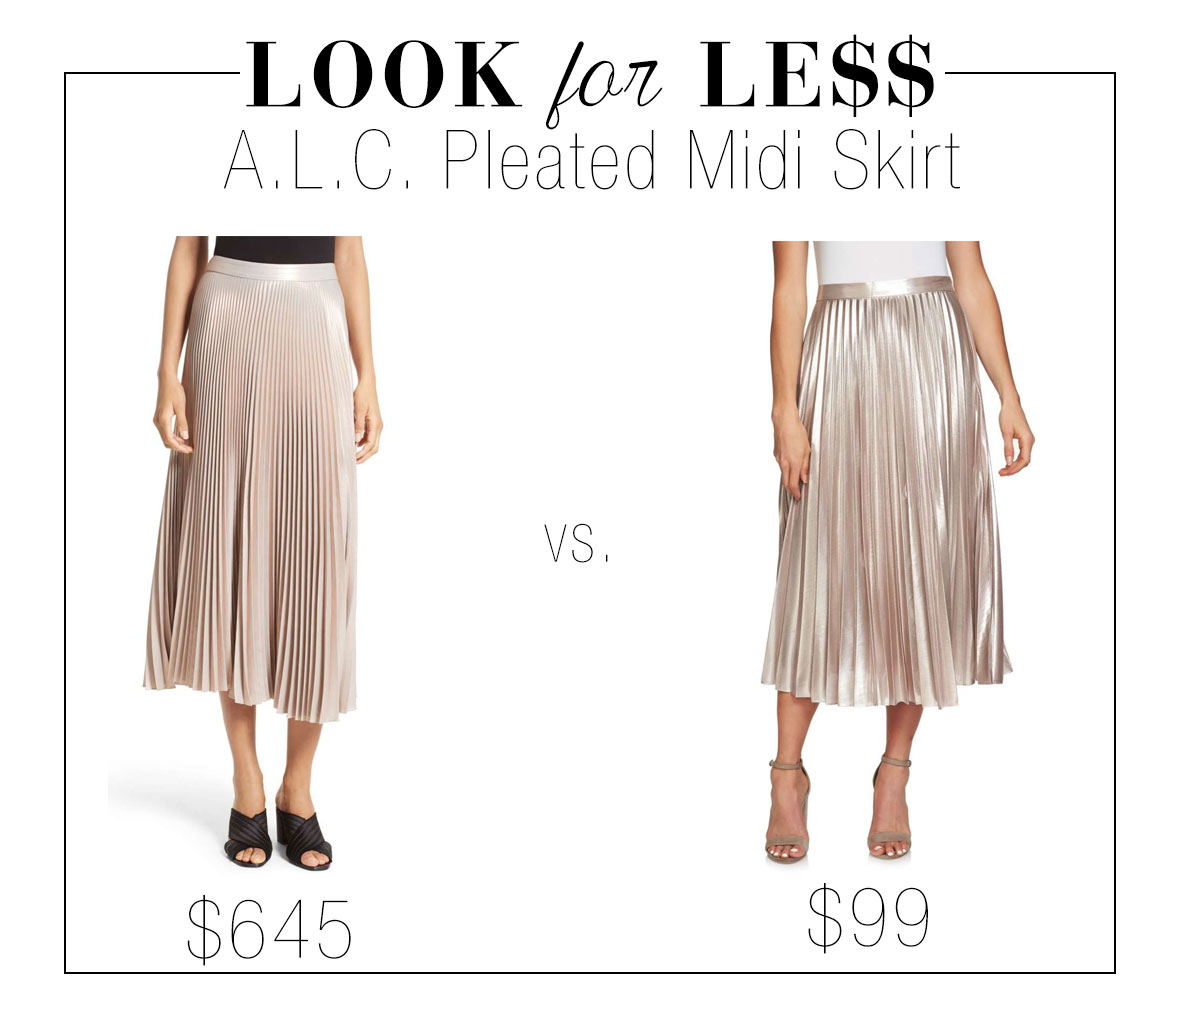 A pleated maxi skirt is perfect for the holiday season.